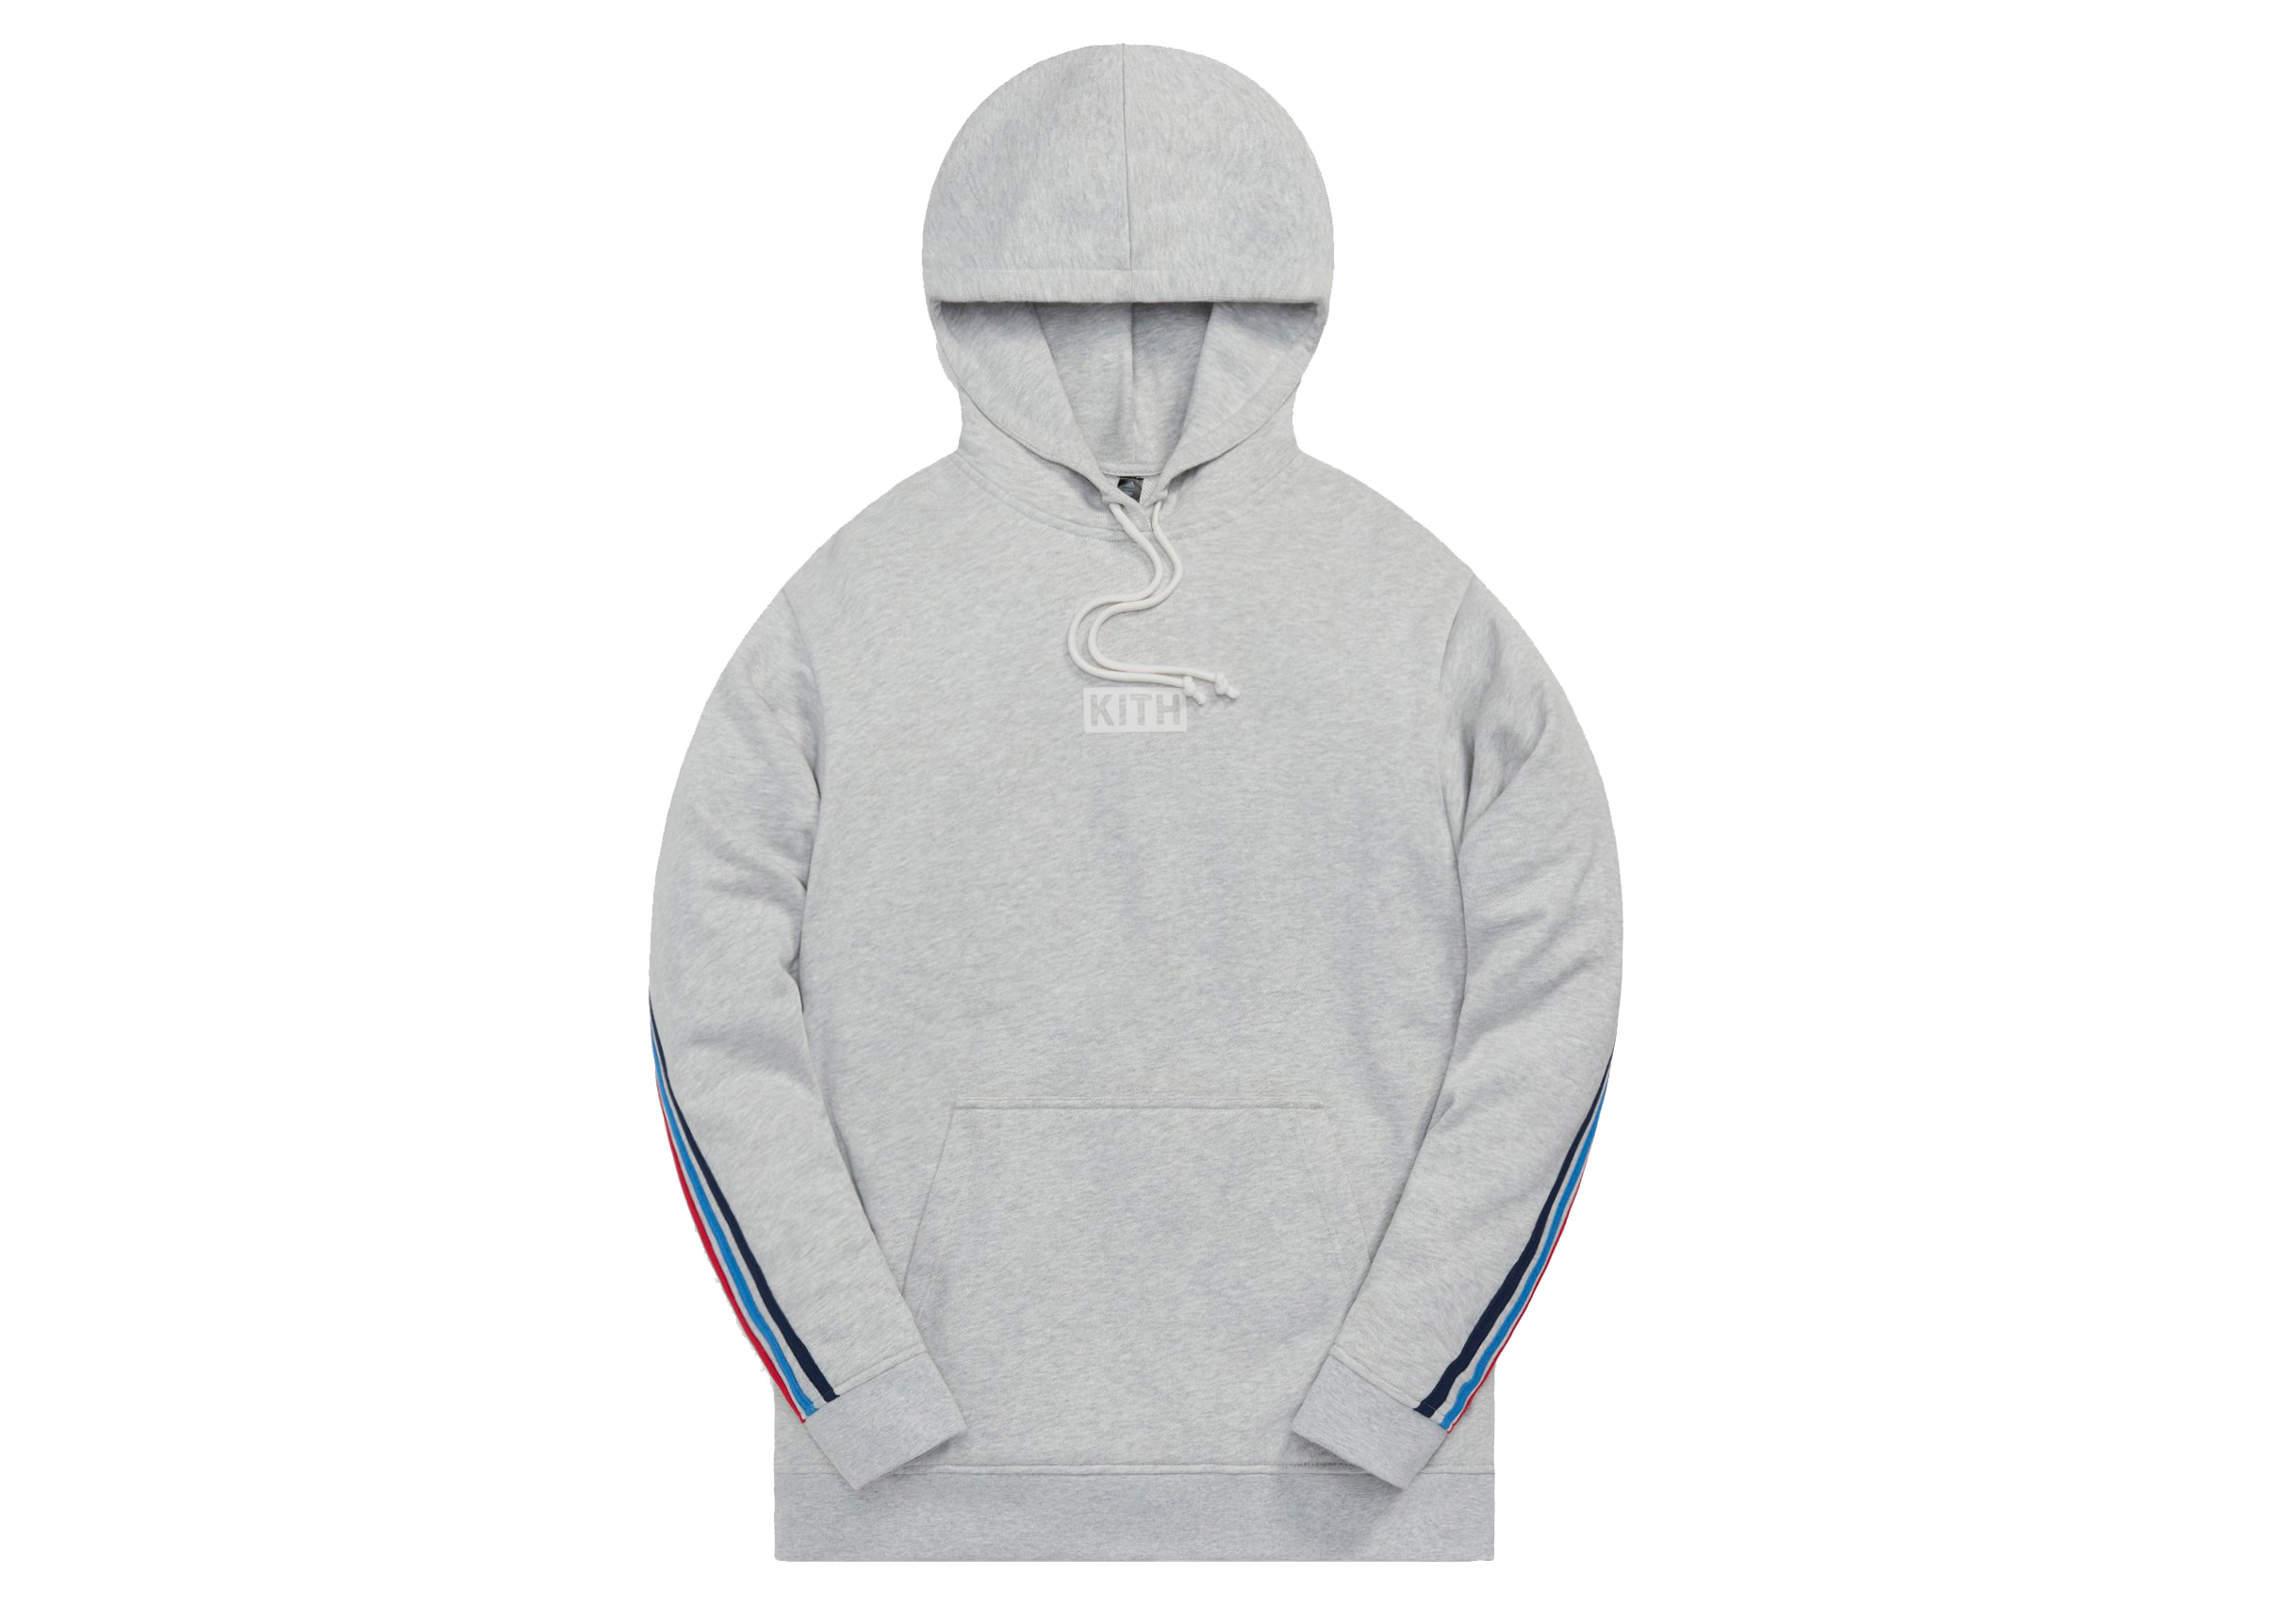 Kith for addidas terrestrial hoodie正規品です